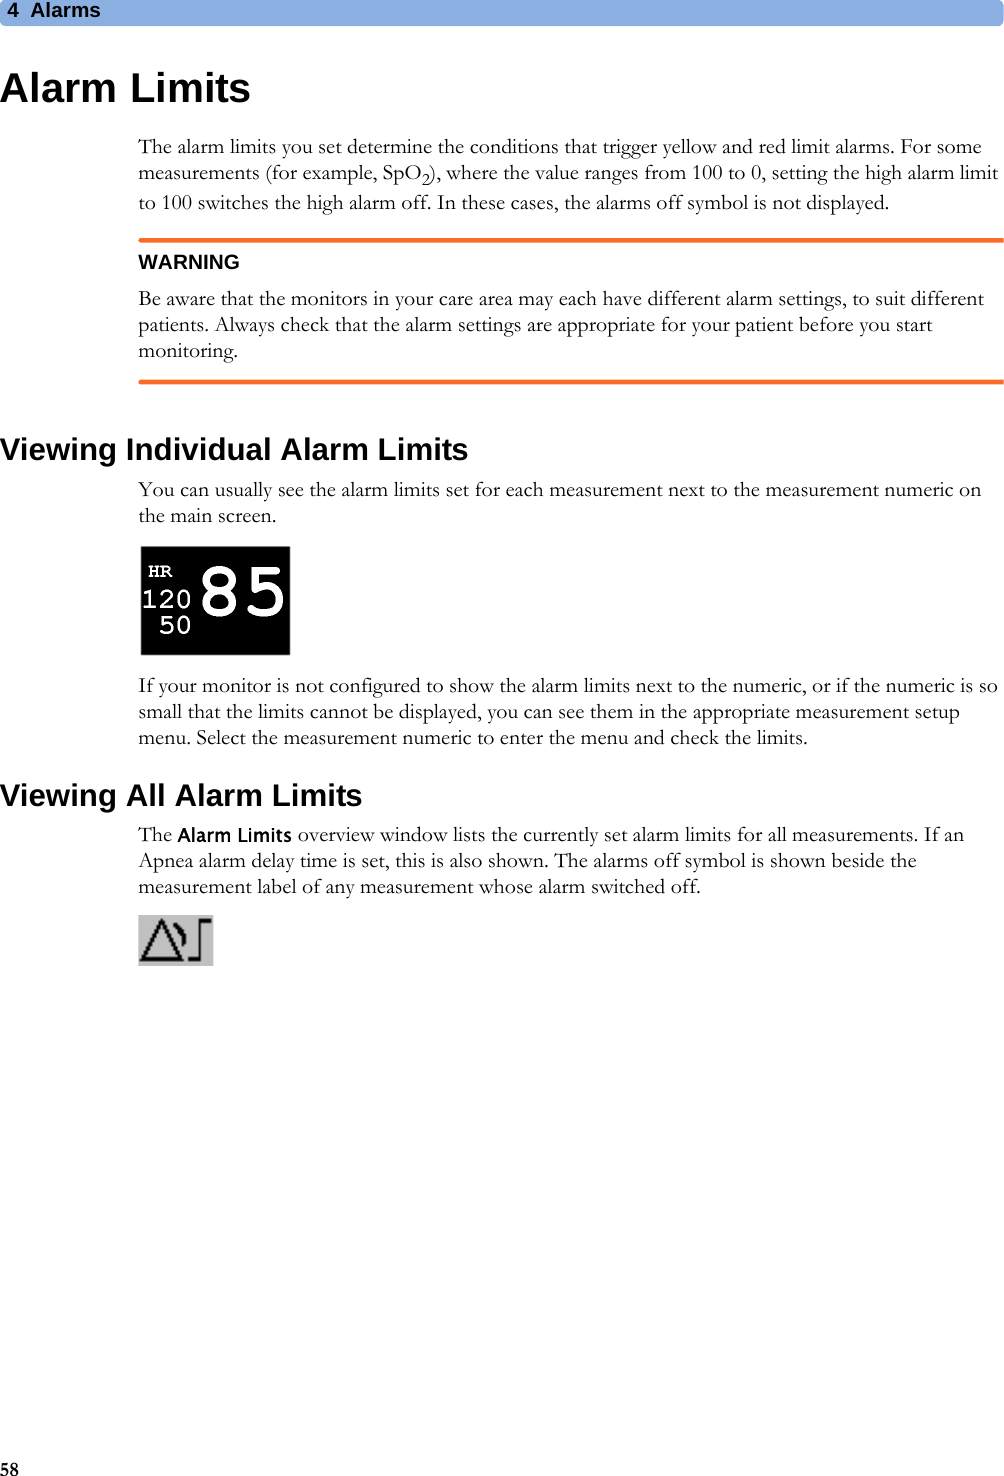 4 Alarms58Alarm LimitsThe alarm limits you set determine the conditions that trigger yellow and red limit alarms. For some measurements (for example, SpO2), where the value ranges from 100 to 0, setting the high alarm limit to 100 switches the high alarm off. In these cases, the alarms off symbol is not displayed.WARNINGBe aware that the monitors in your care area may each have different alarm settings, to suit different patients. Always check that the alarm settings are appropriate for your patient before you start monitoring.Viewing Individual Alarm LimitsYou can usually see the alarm limits set for each measurement next to the measurement numeric on the main screen. If your monitor is not configured to show the alarm limits next to the numeric, or if the numeric is so small that the limits cannot be displayed, you can see them in the appropriate measurement setup menu. Select the measurement numeric to enter the menu and check the limits.Viewing All Alarm LimitsThe Alarm Limits overview window lists the currently set alarm limits for all measurements. If an Apnea alarm delay time is set, this is also shown. The alarms off symbol is shown beside the measurement label of any measurement whose alarm switched off.